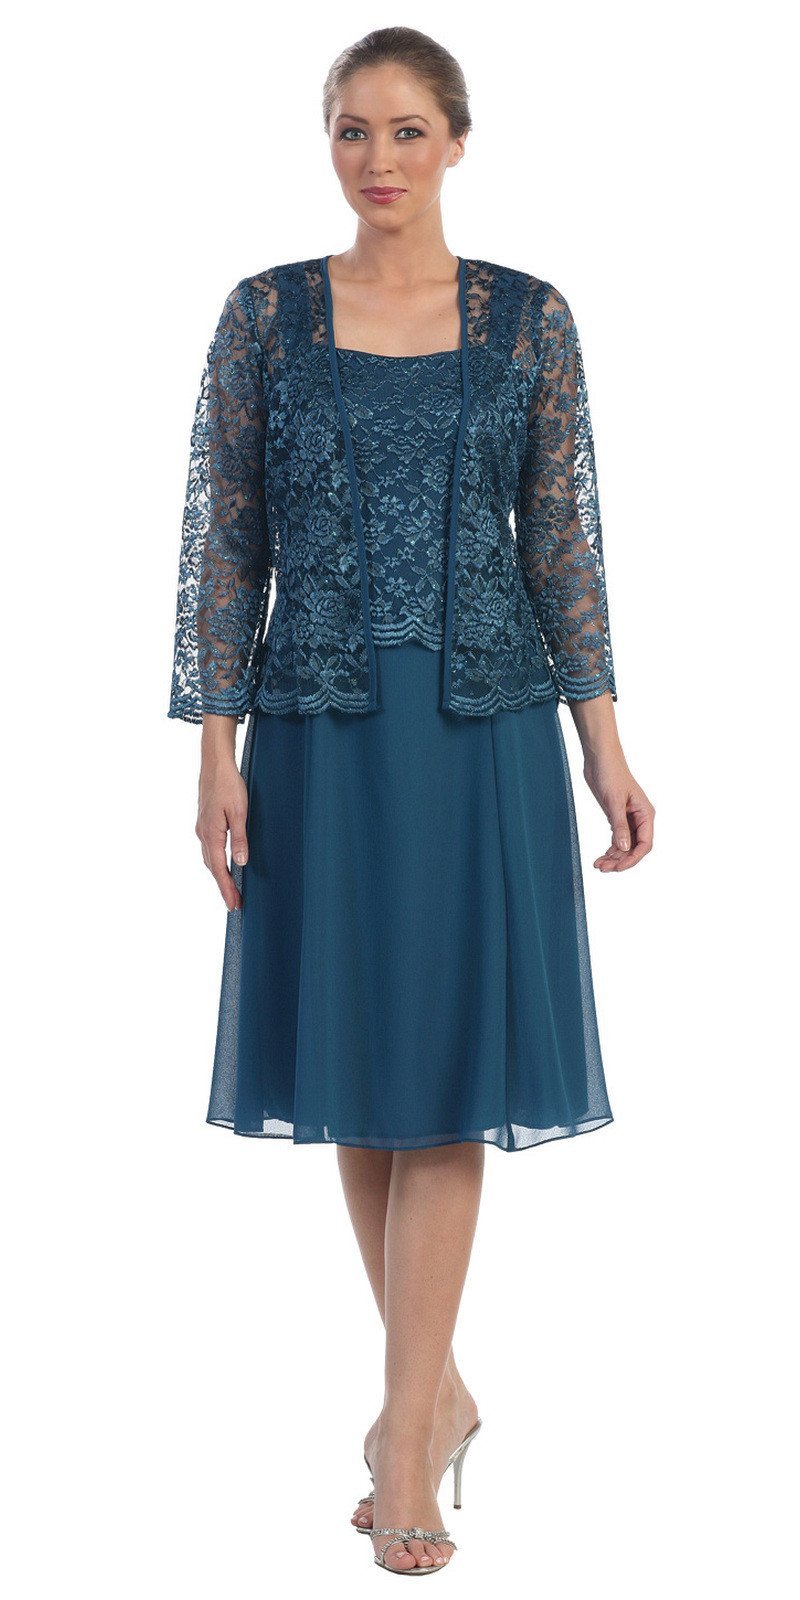 Short Teal Mother of Groom Dress Chiffon Knee Length Lace Jacket